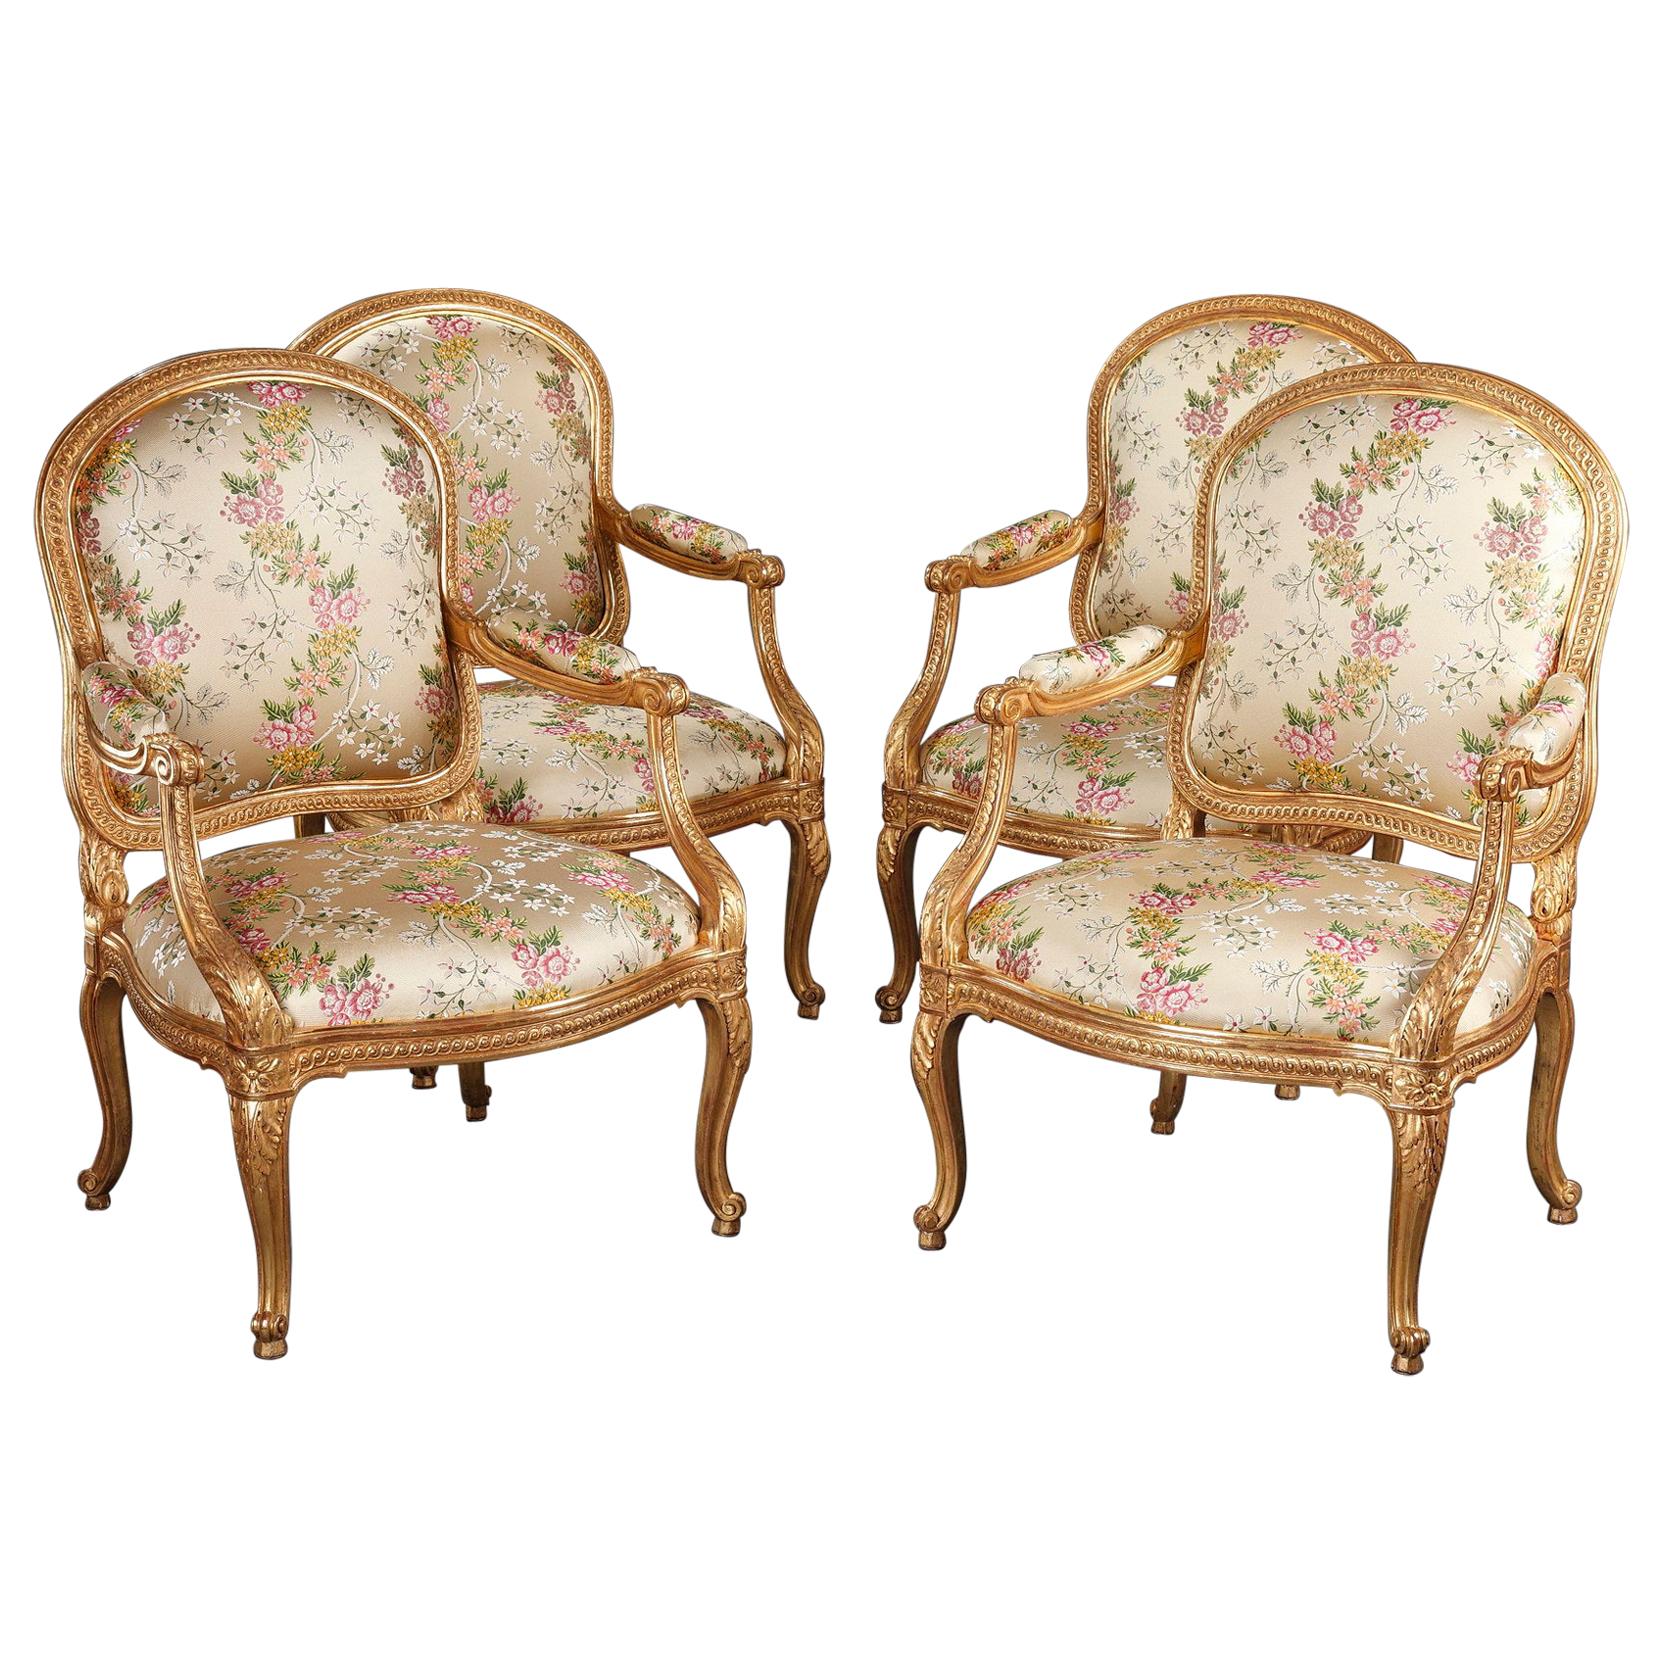 Beautiful Set of Four Transition Style Armchairs "A Chassis", France, Circa 1880 For Sale